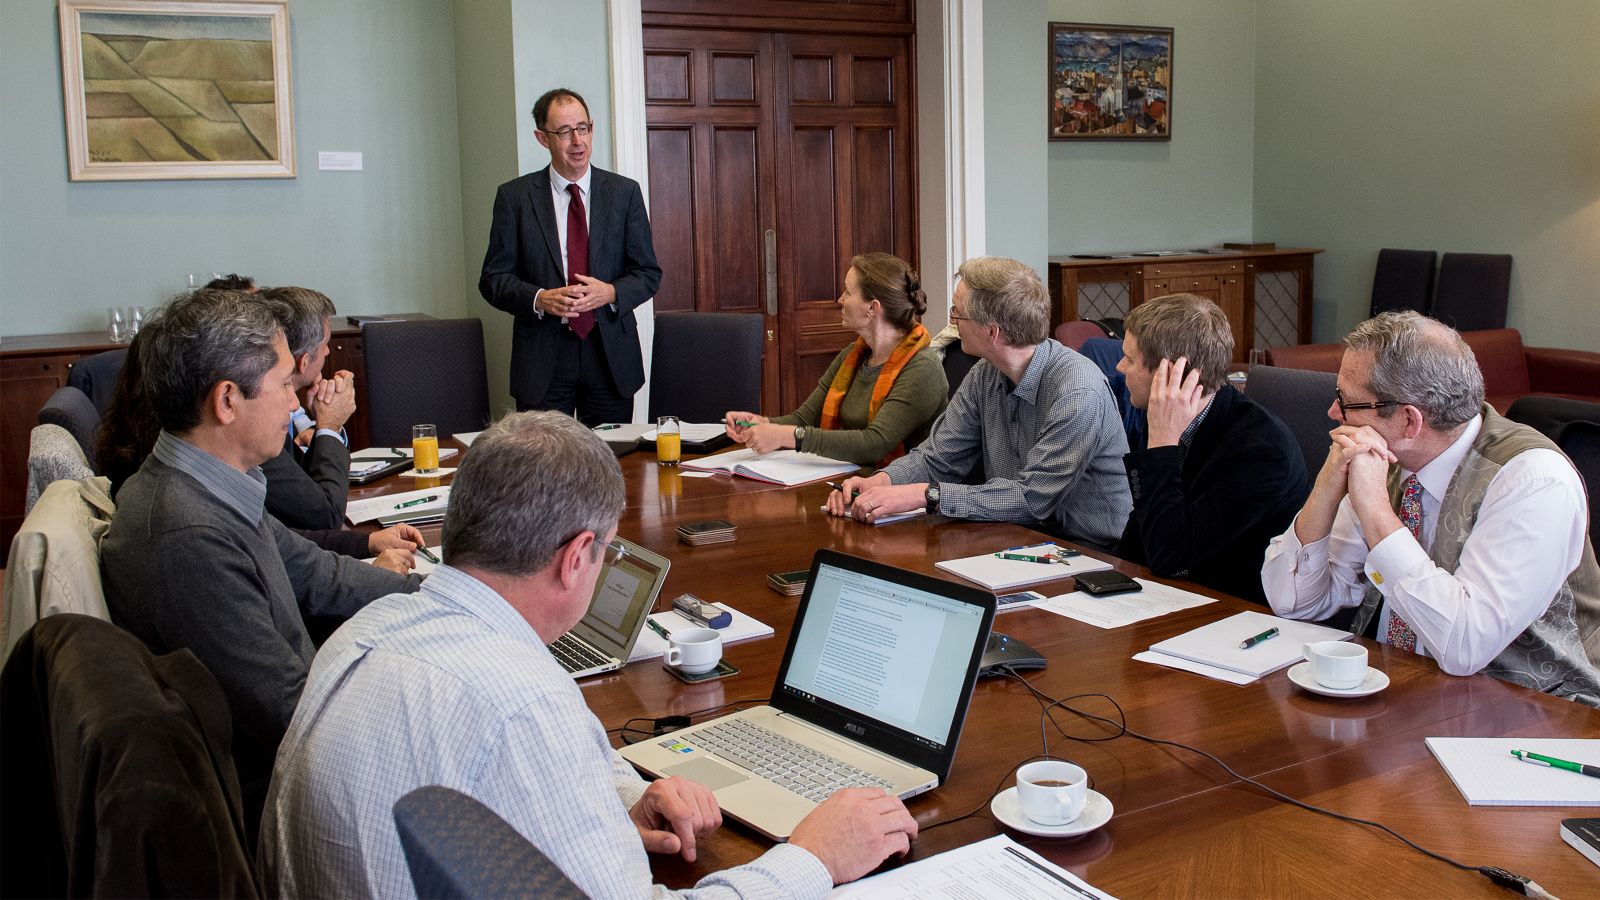 A man presents to a boardroom of people with laptops and paper in front of them.